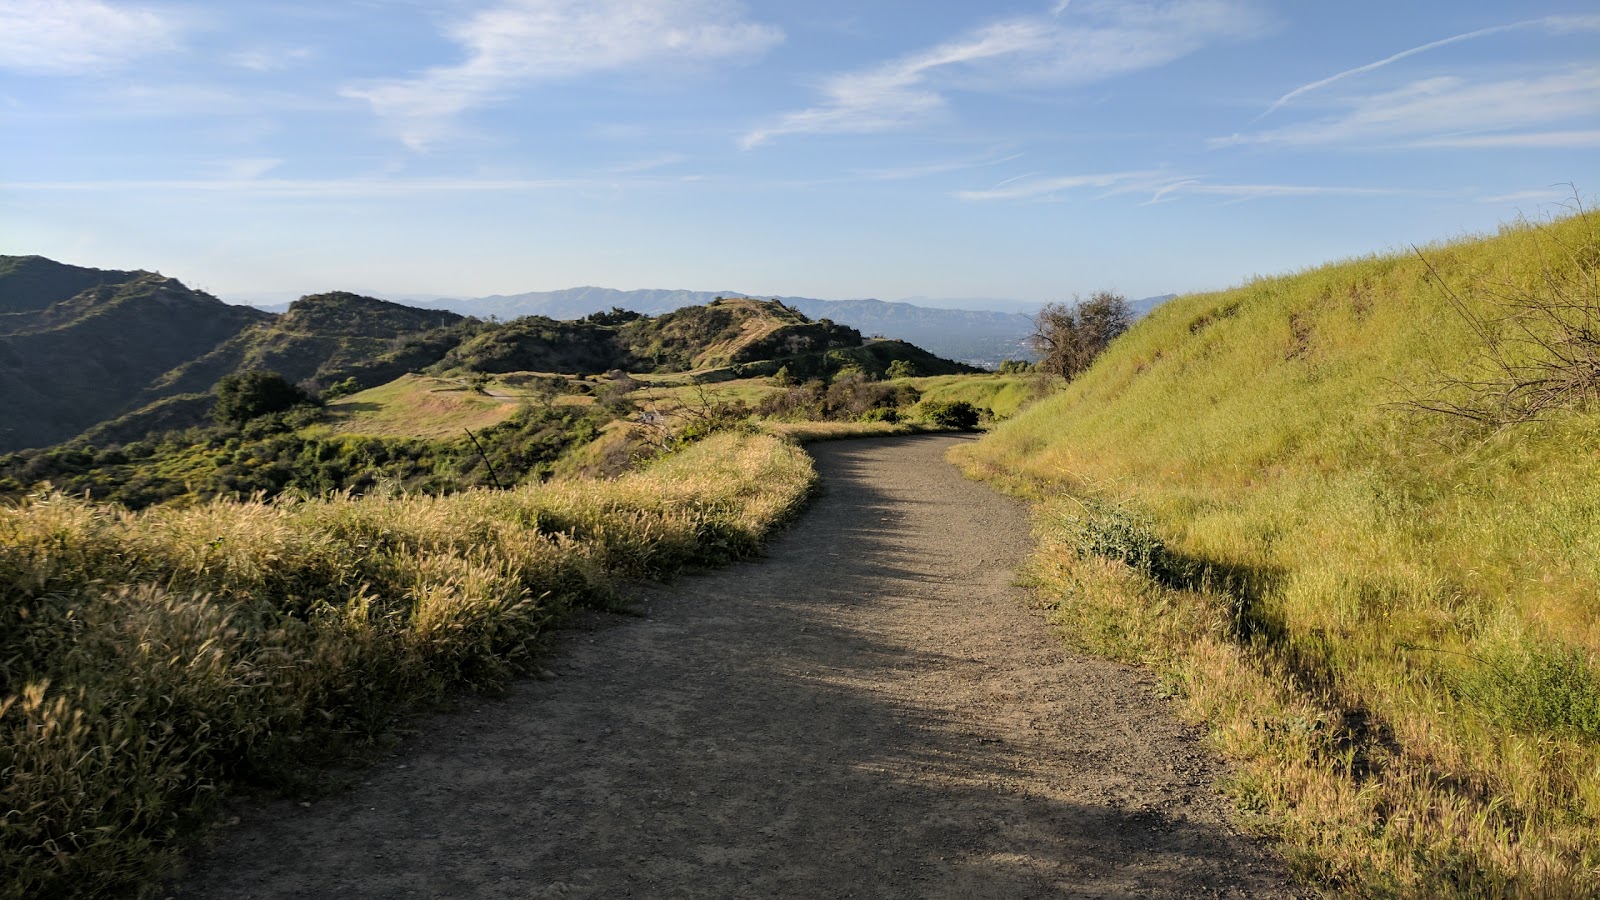 Member Canyonback Trail in Los Angeles CA